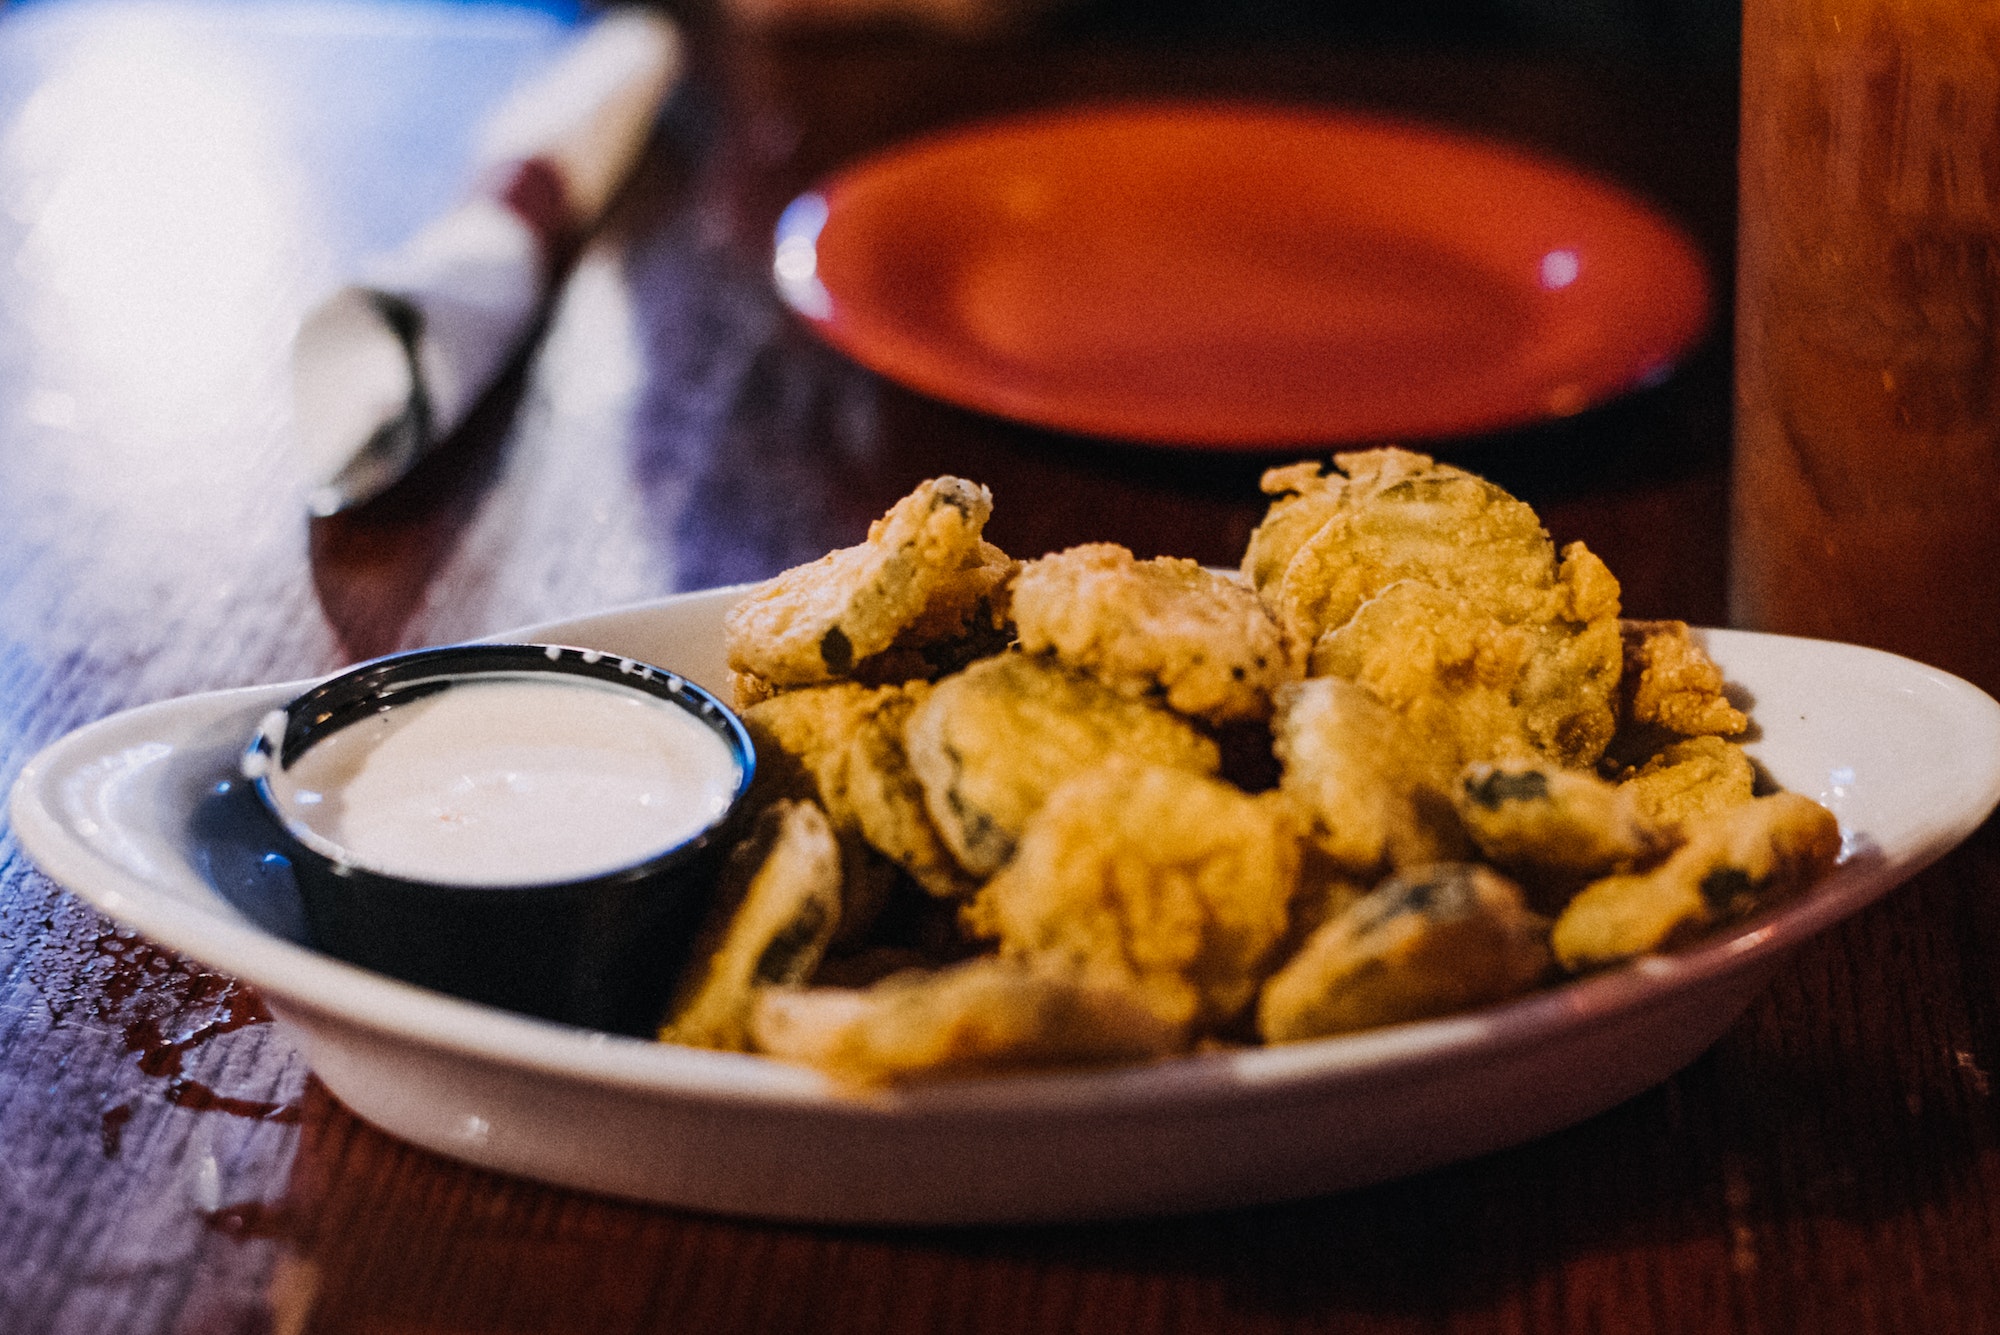 Fried pickles and ranch dressing and a plate